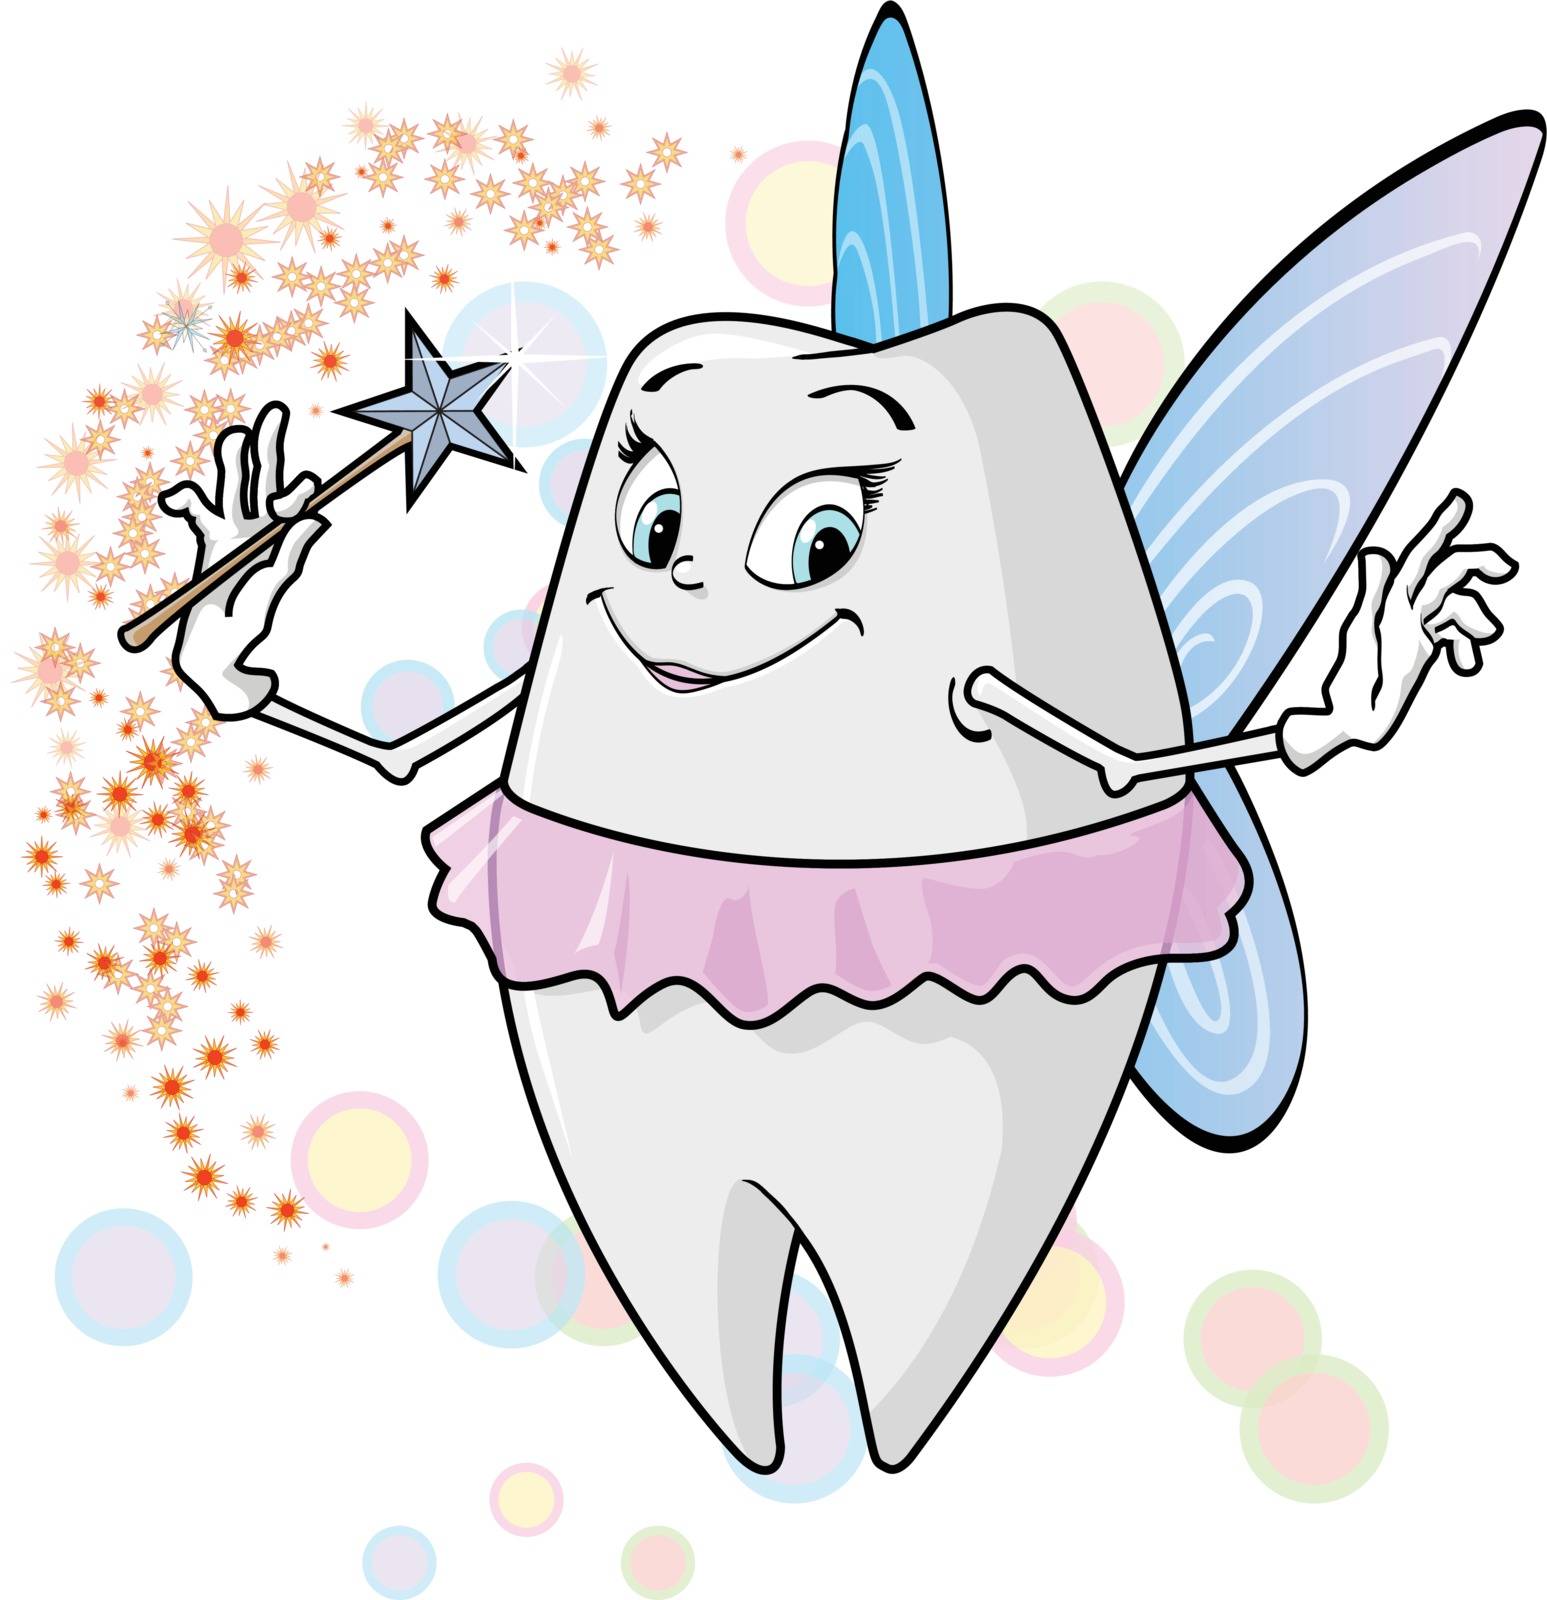 A cute tooth fairy with her magic wand.